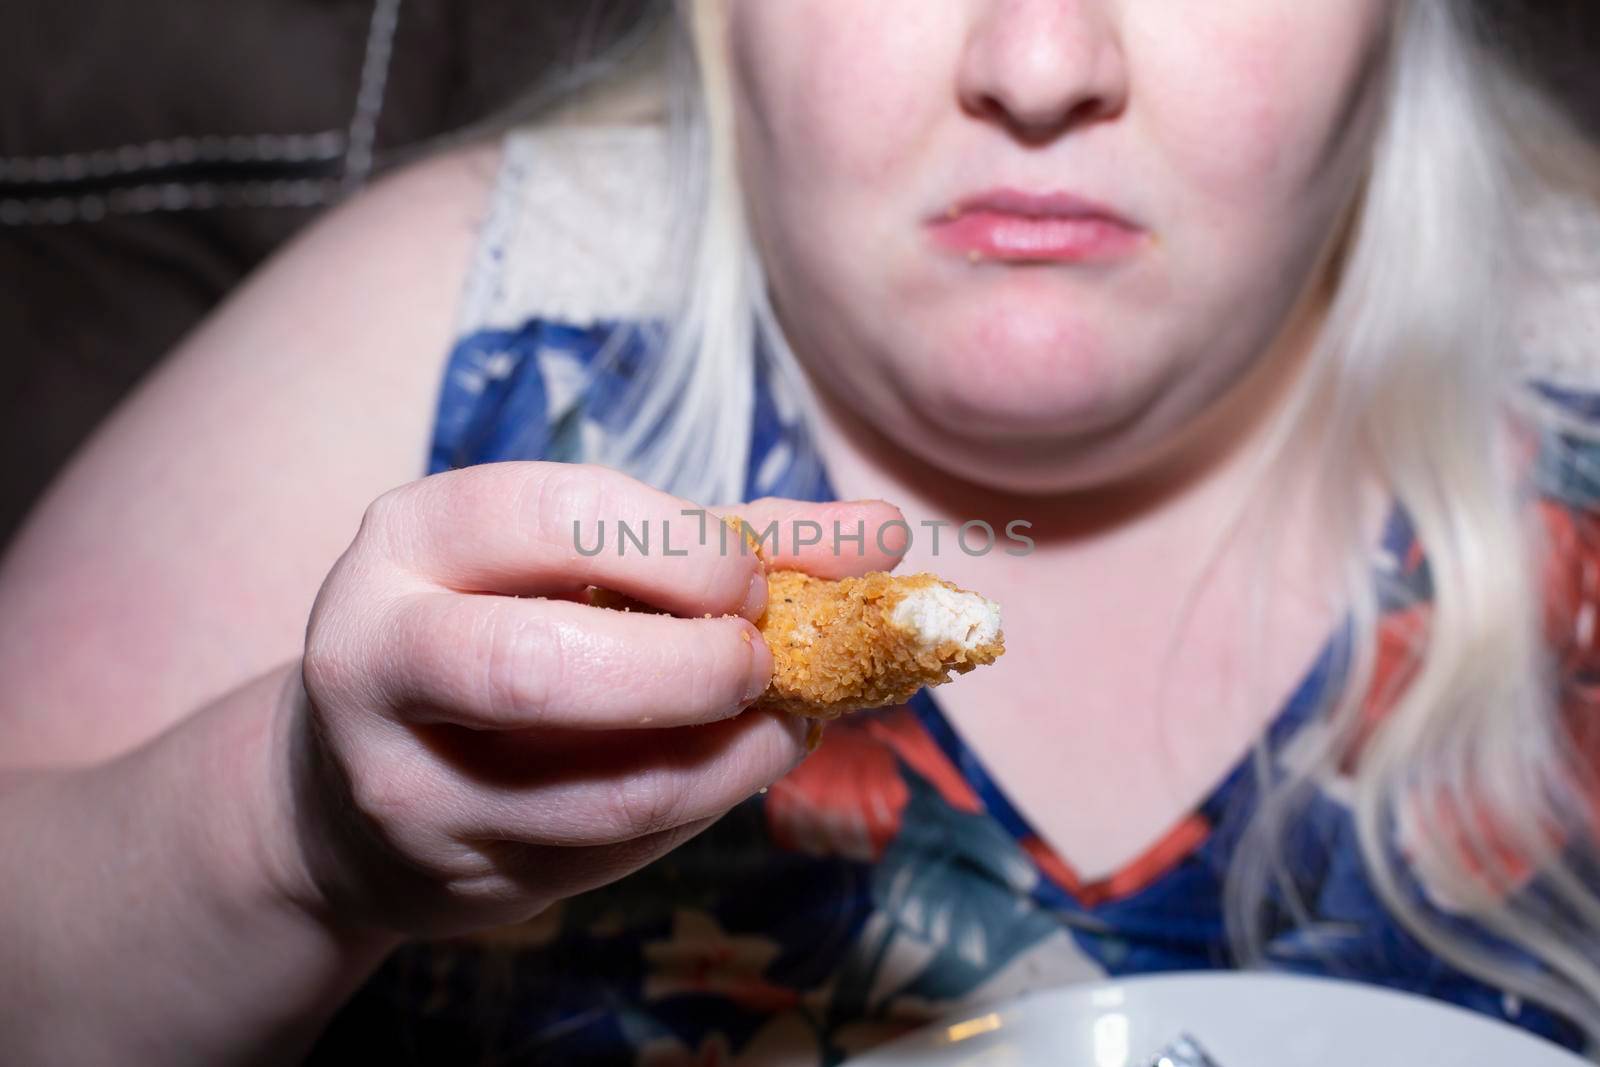 Obese, albino woman eating a fried chicken tender